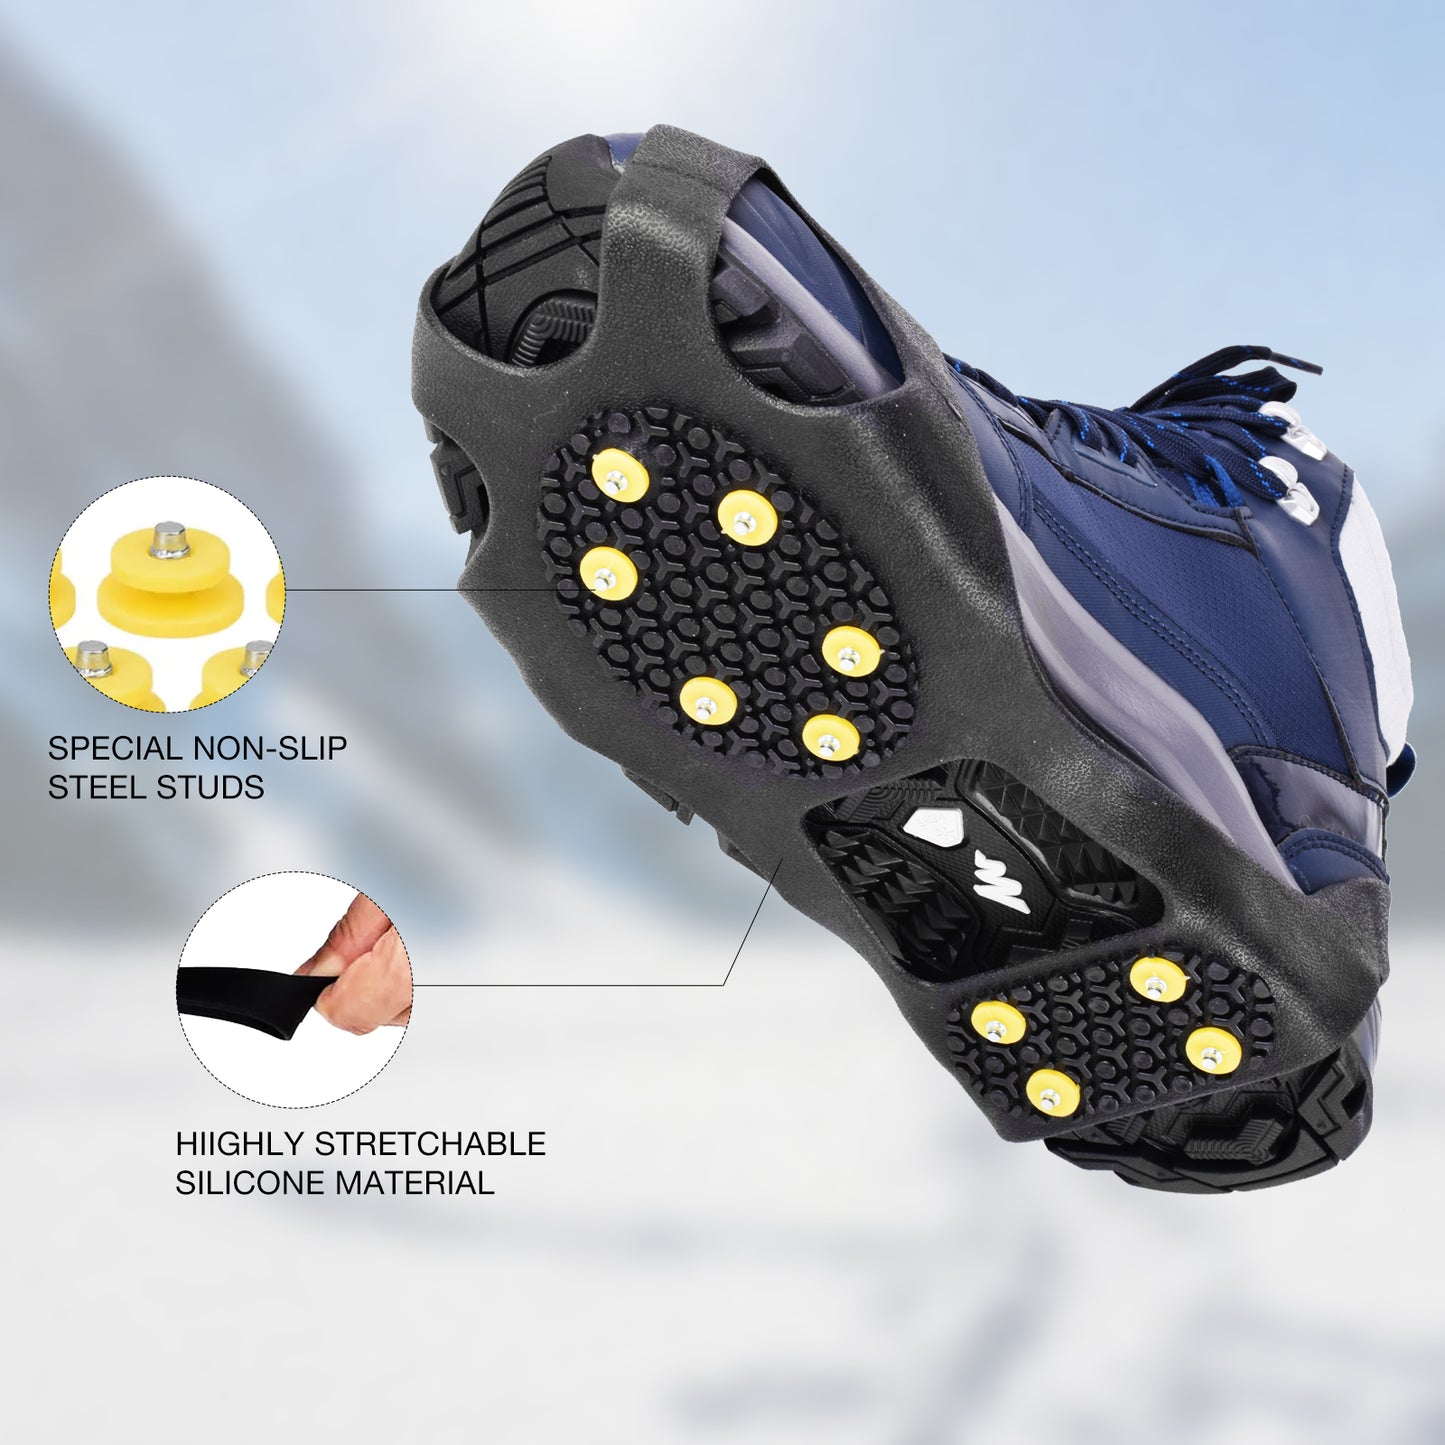 SF Ice Traction Cleats for Shoes and Boots Large Rubber with 10 Steel Studs Crampons for Ice Snow Anti Slip Traction Footwear